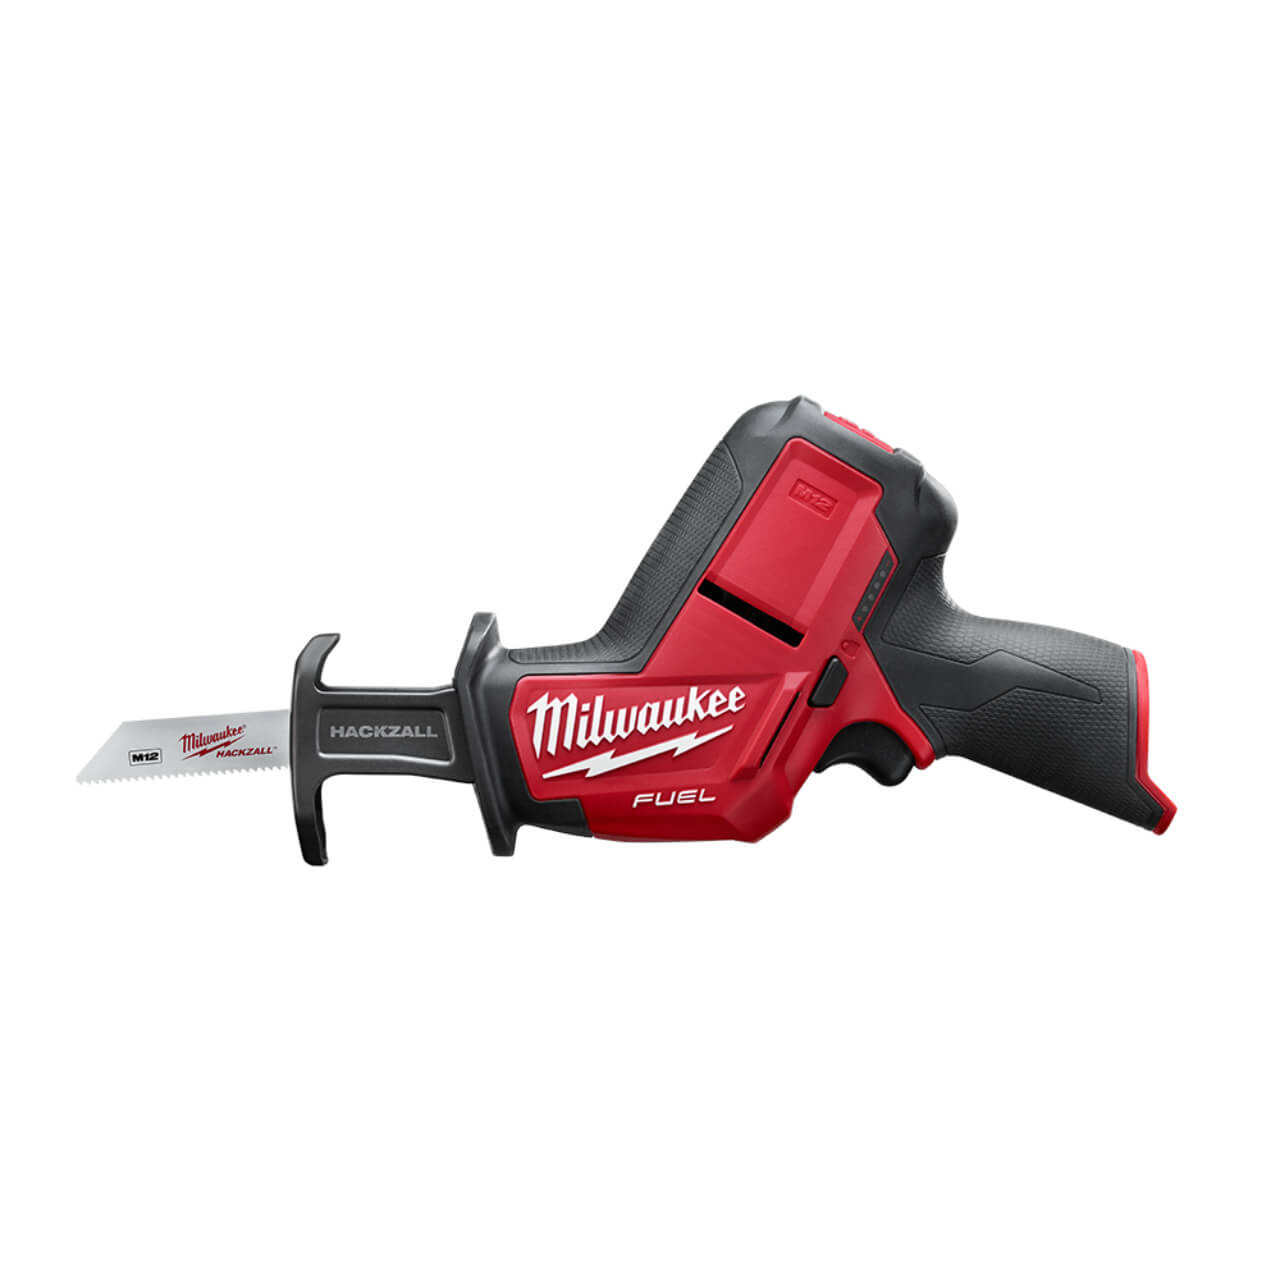 Milwaukee M12 Fuel Hackzall Cordless Reciprocating Saw Skin Only